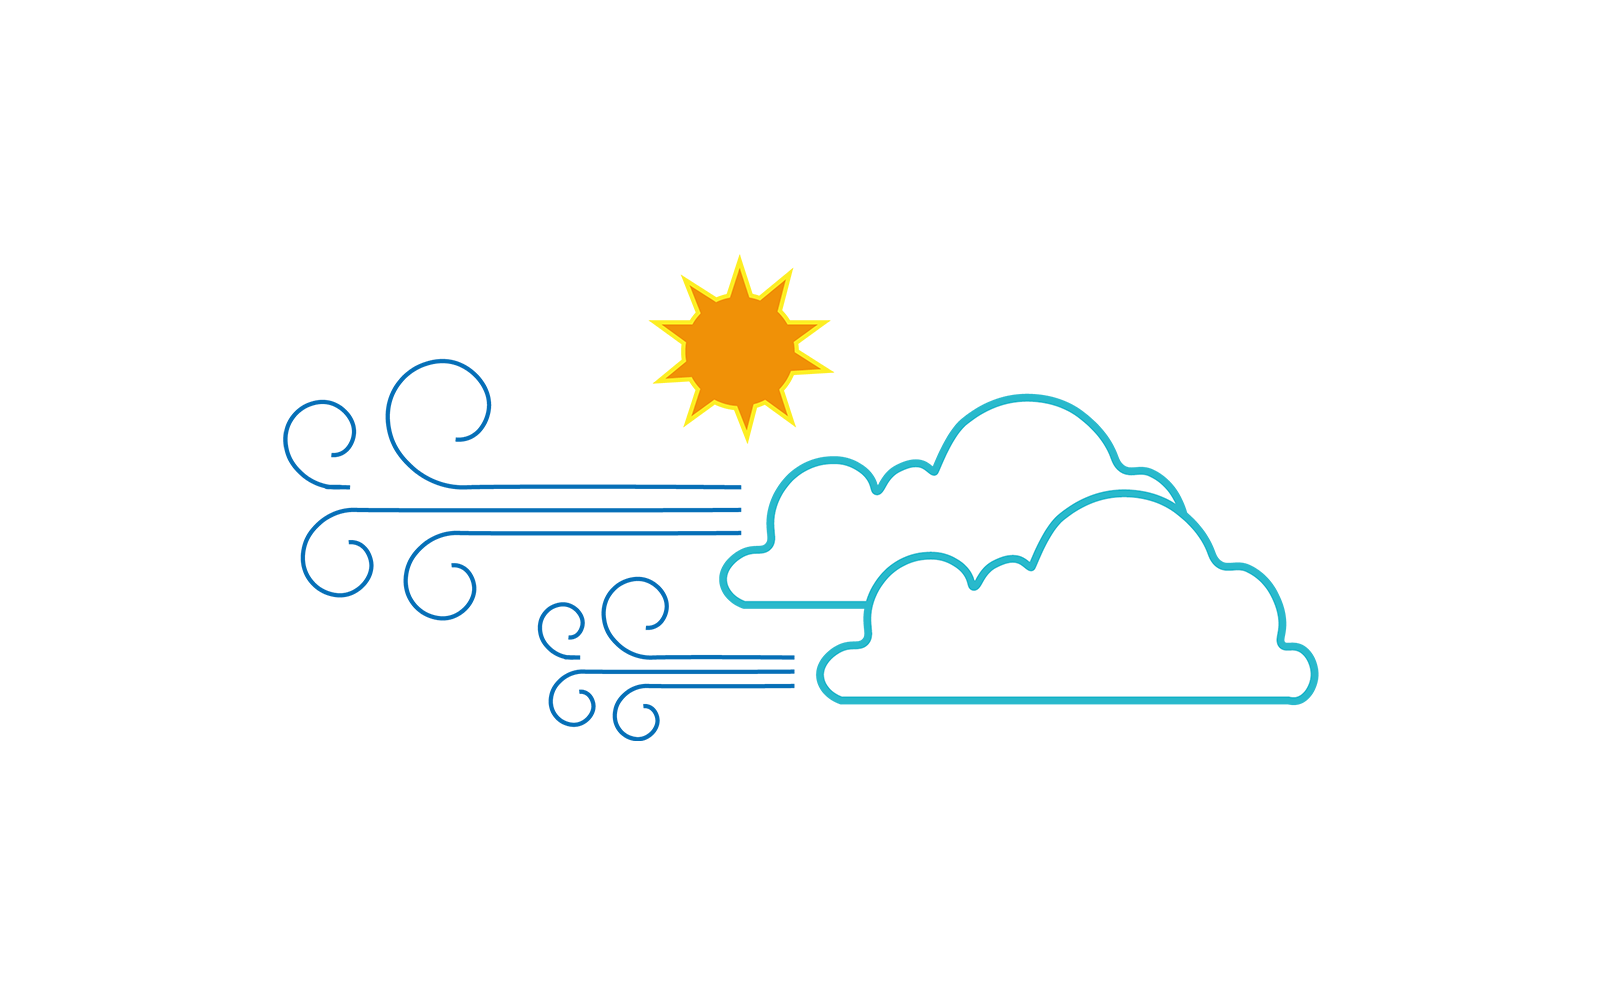 Clouds and Sun Illustration Vector